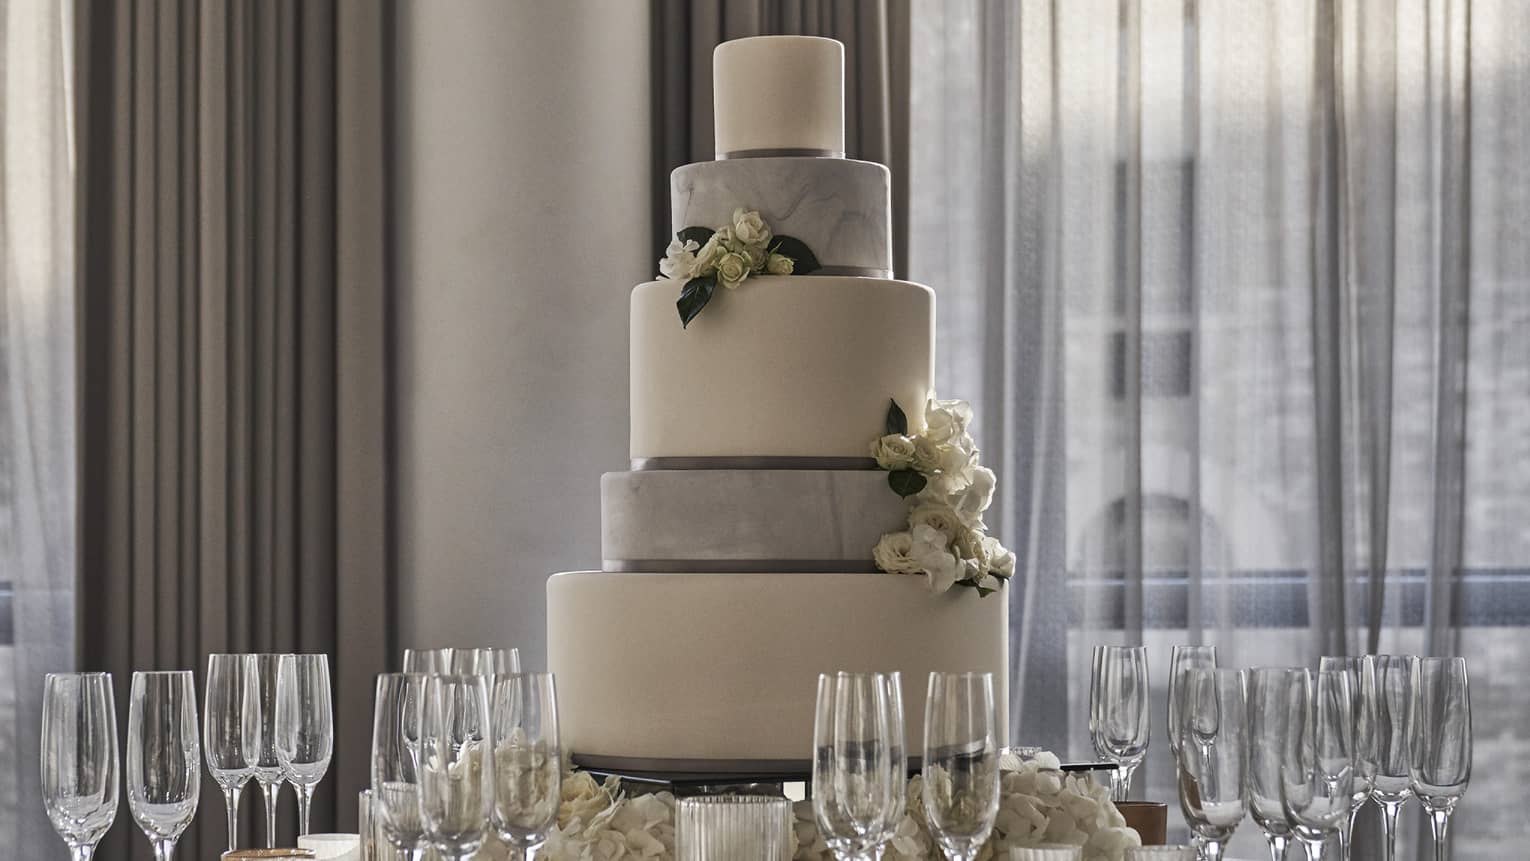 Tiered wedding cake on round banquet table with Champagne glasses